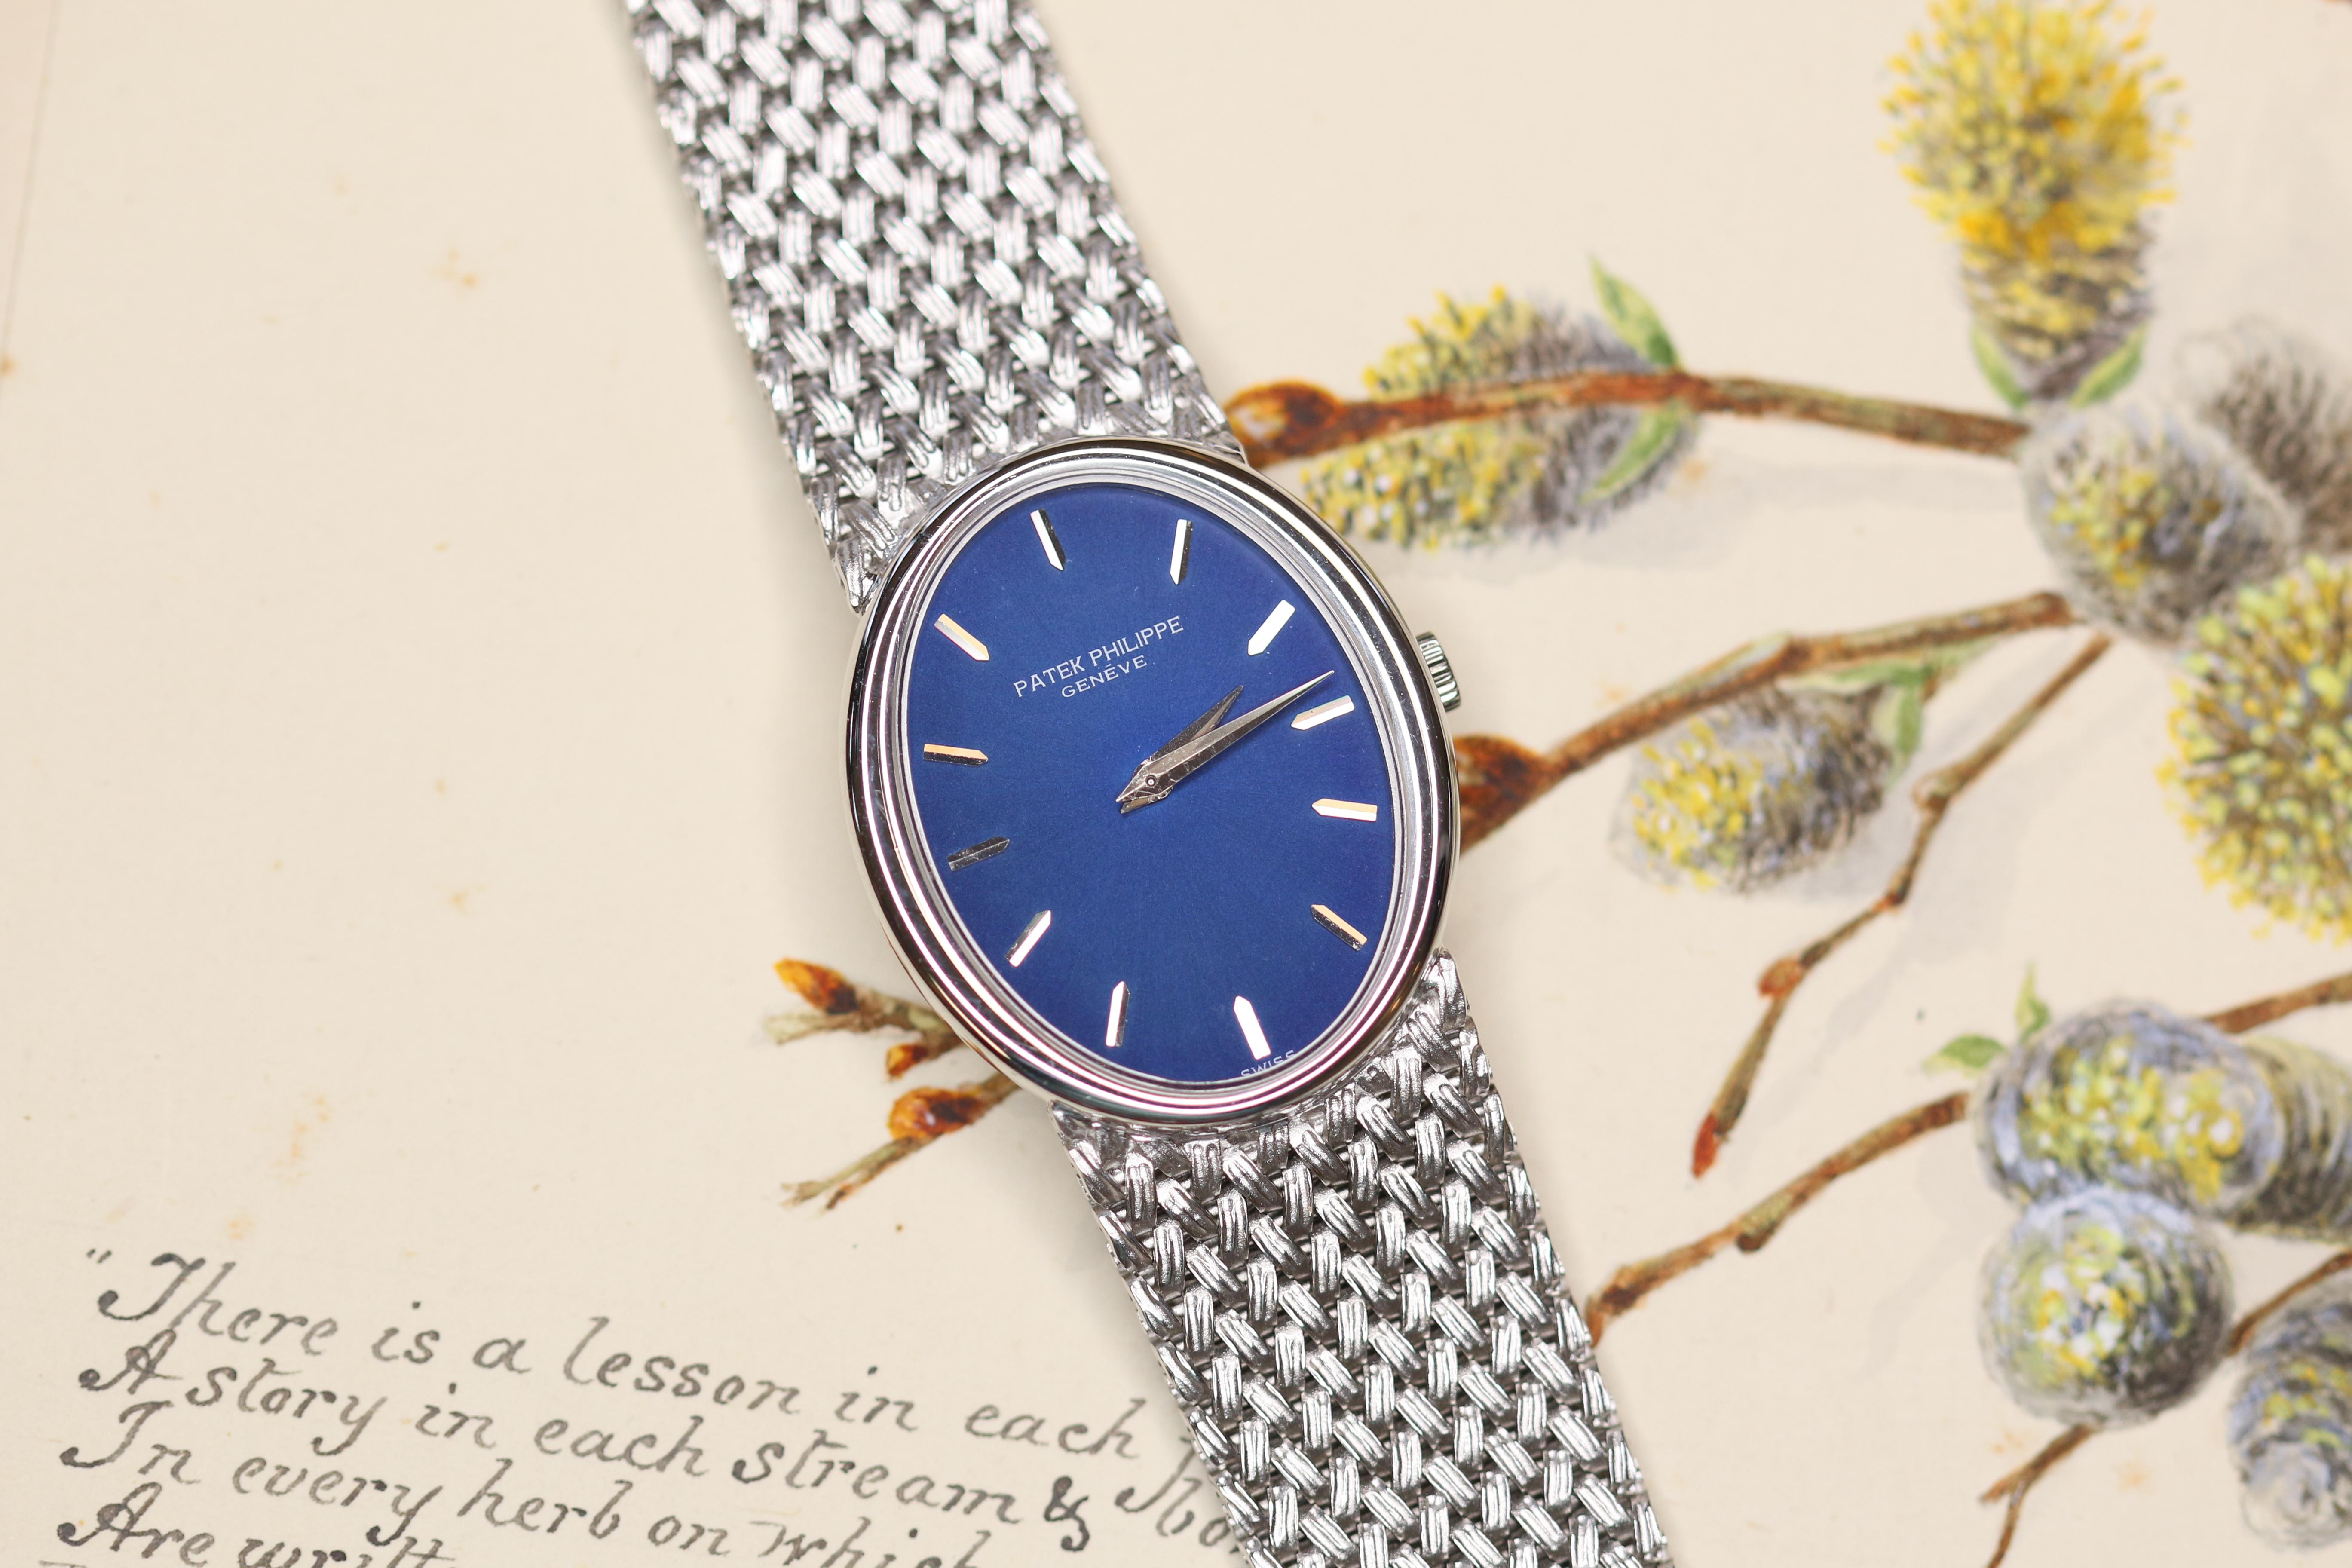 A supreme example of why Patek Philippe stands out from the rest. This unbeatable 18 karat white gold wristwatch with a striking blue dial. This comes with its own certification.

The first thing that draws your eyes into this remarkable watch is